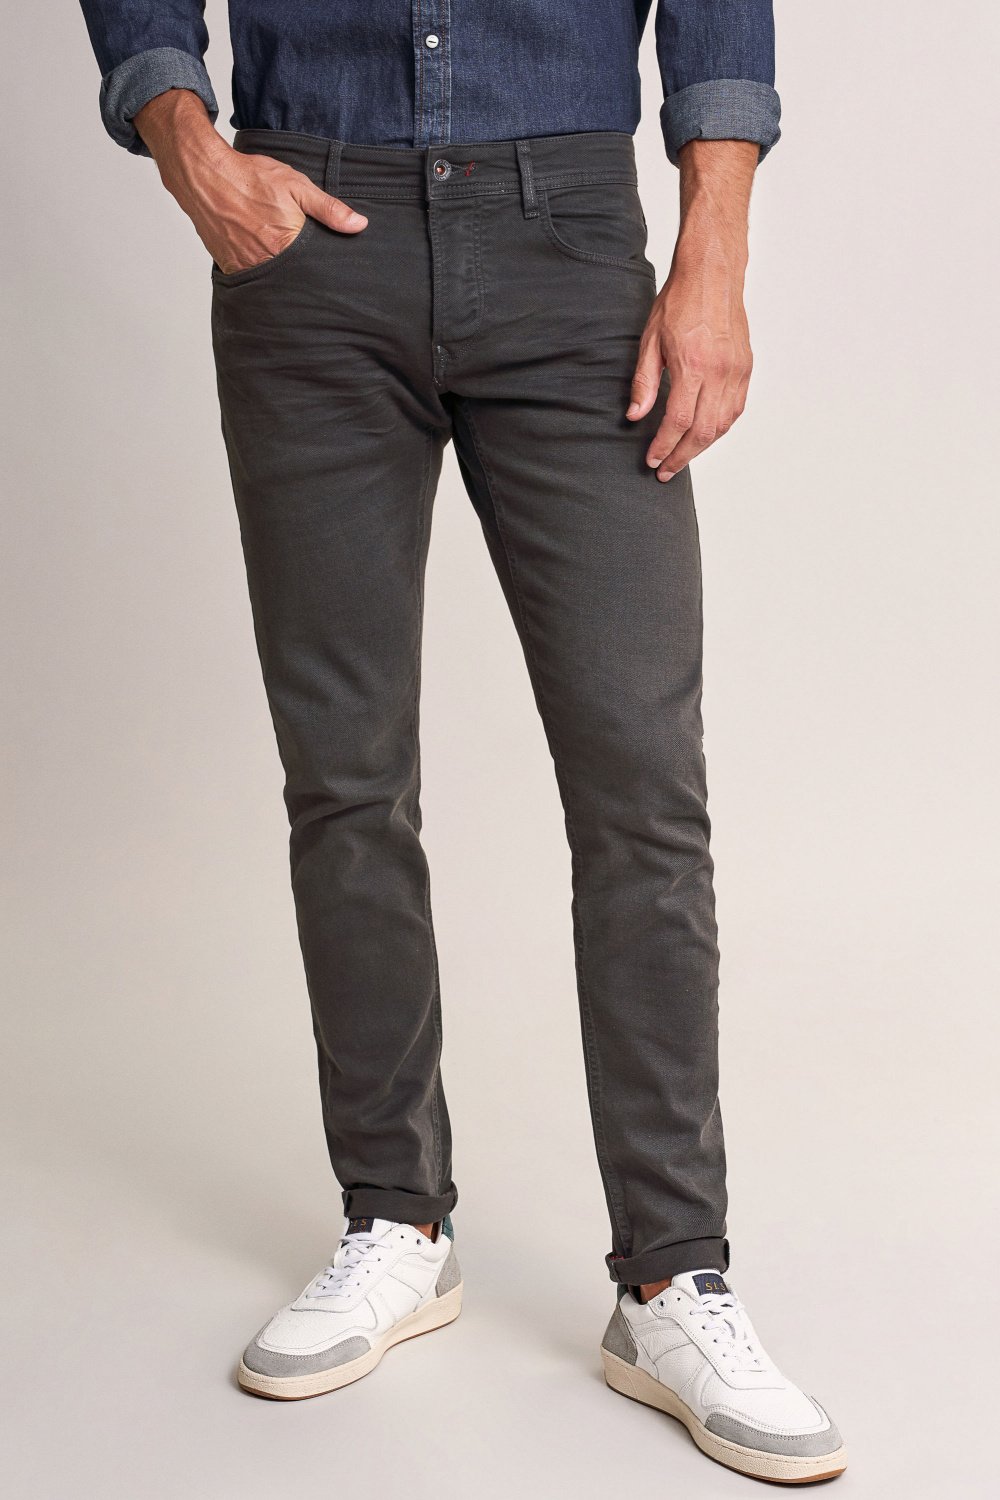 Clash slim carrot jeans with rips - Salsa